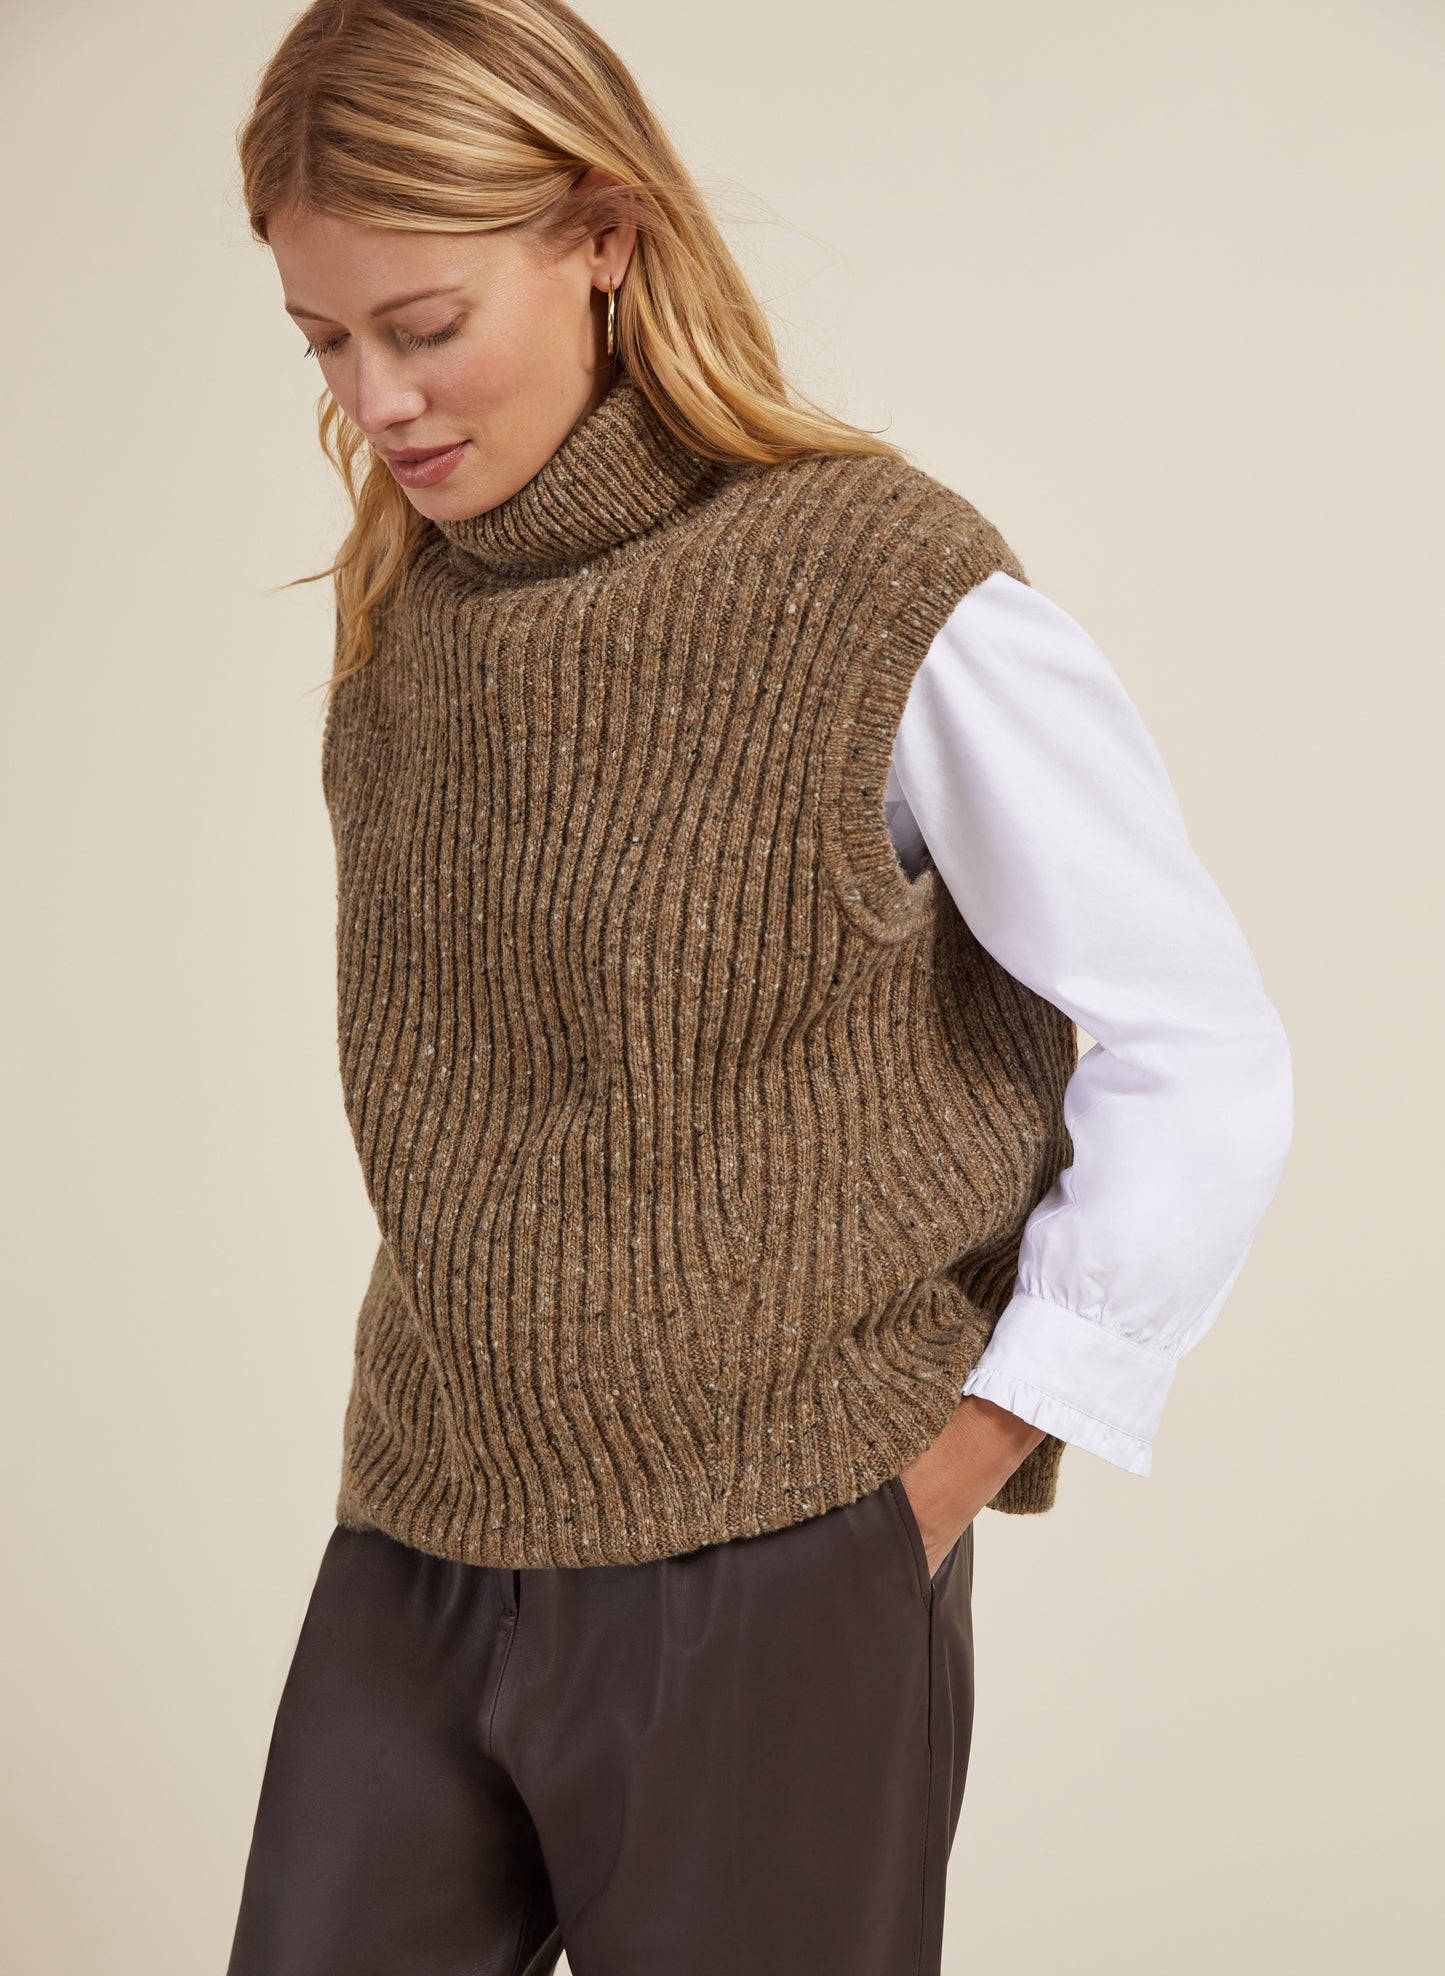 Joline Recycled Wool Knitted Vest